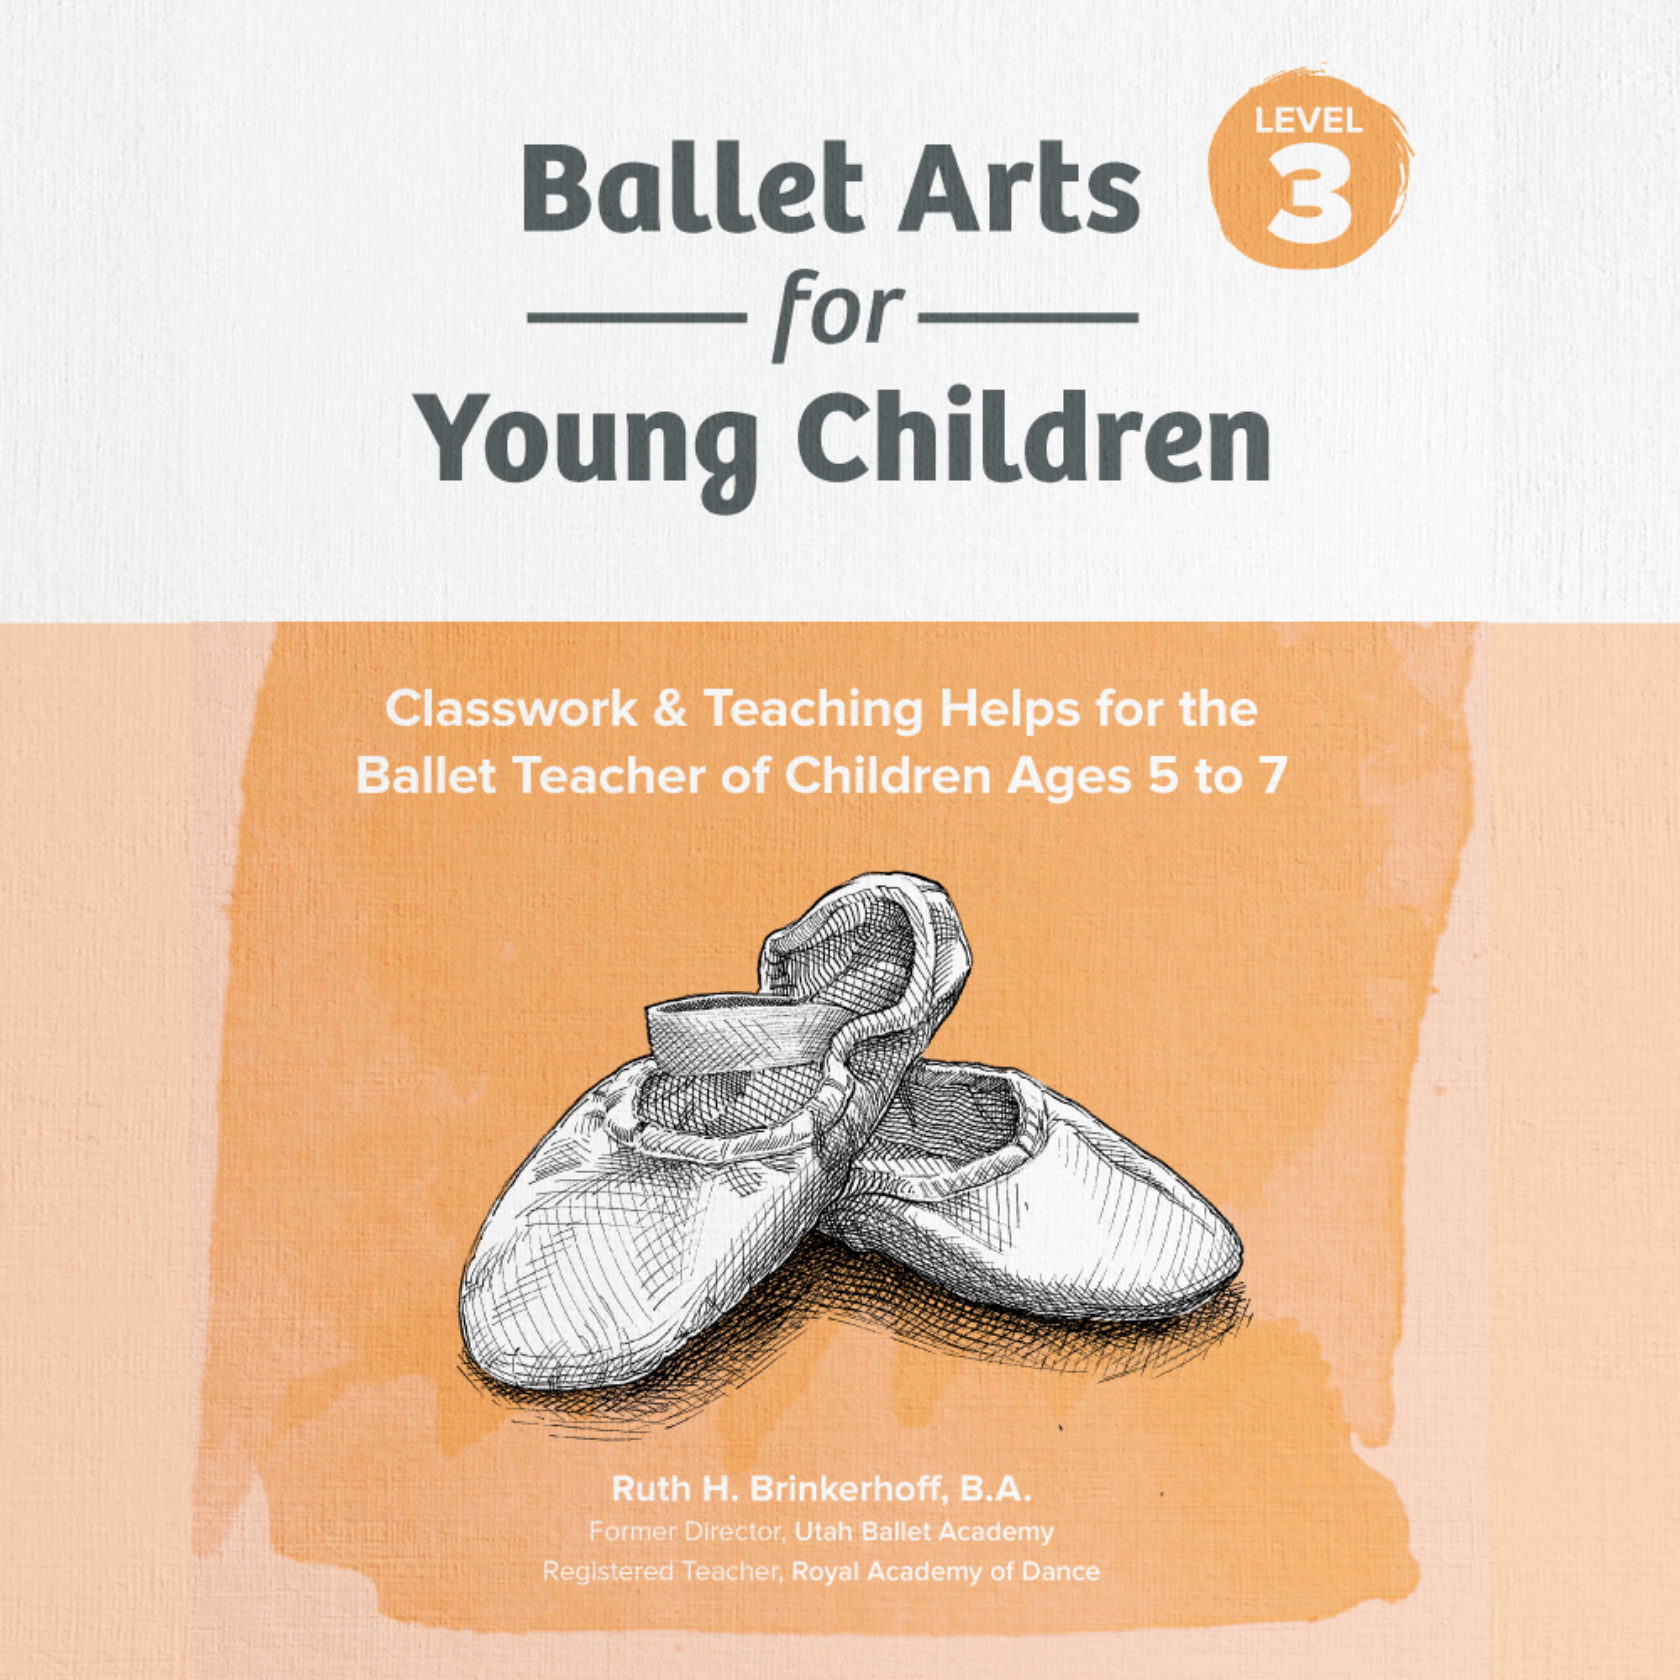 Level 3 (Ages 5 to 7) Curriculum Book